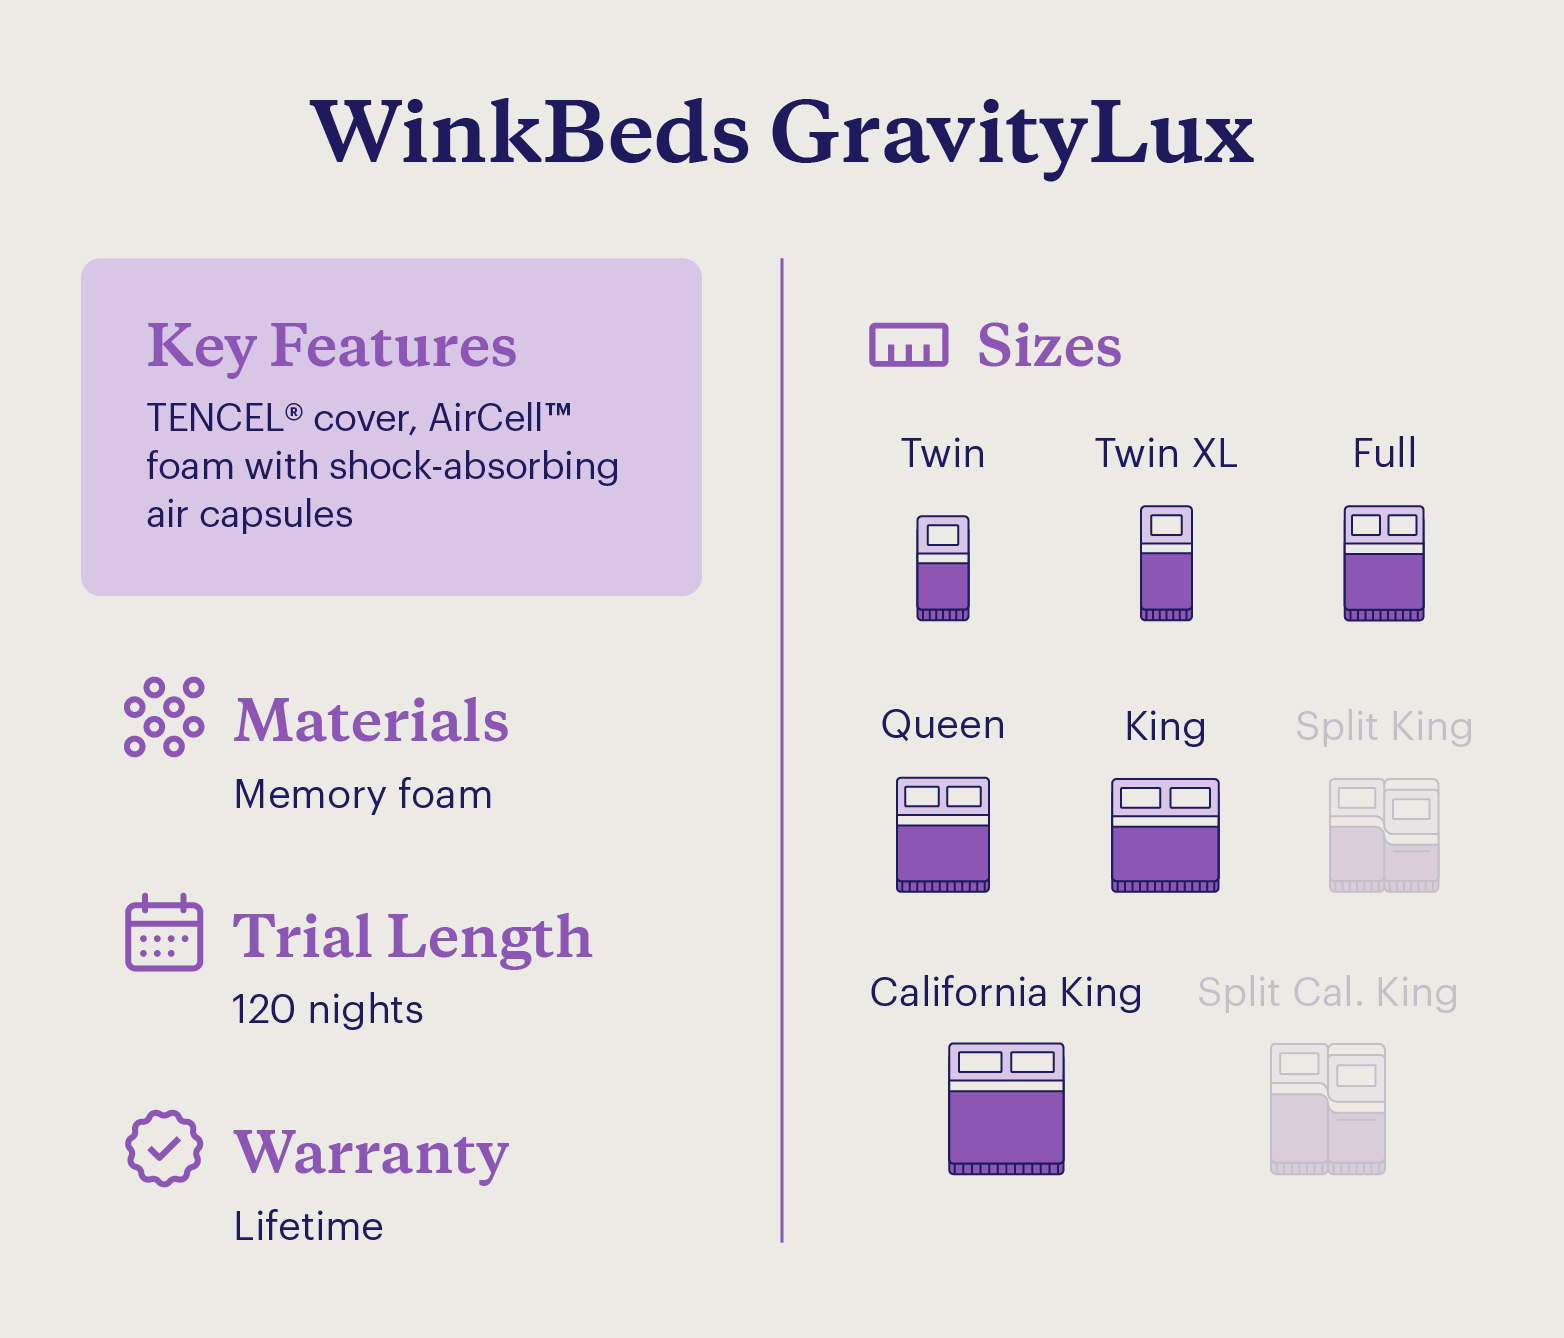 A graphic shows the key features and details of the WinkBeds GravityLux mattress.